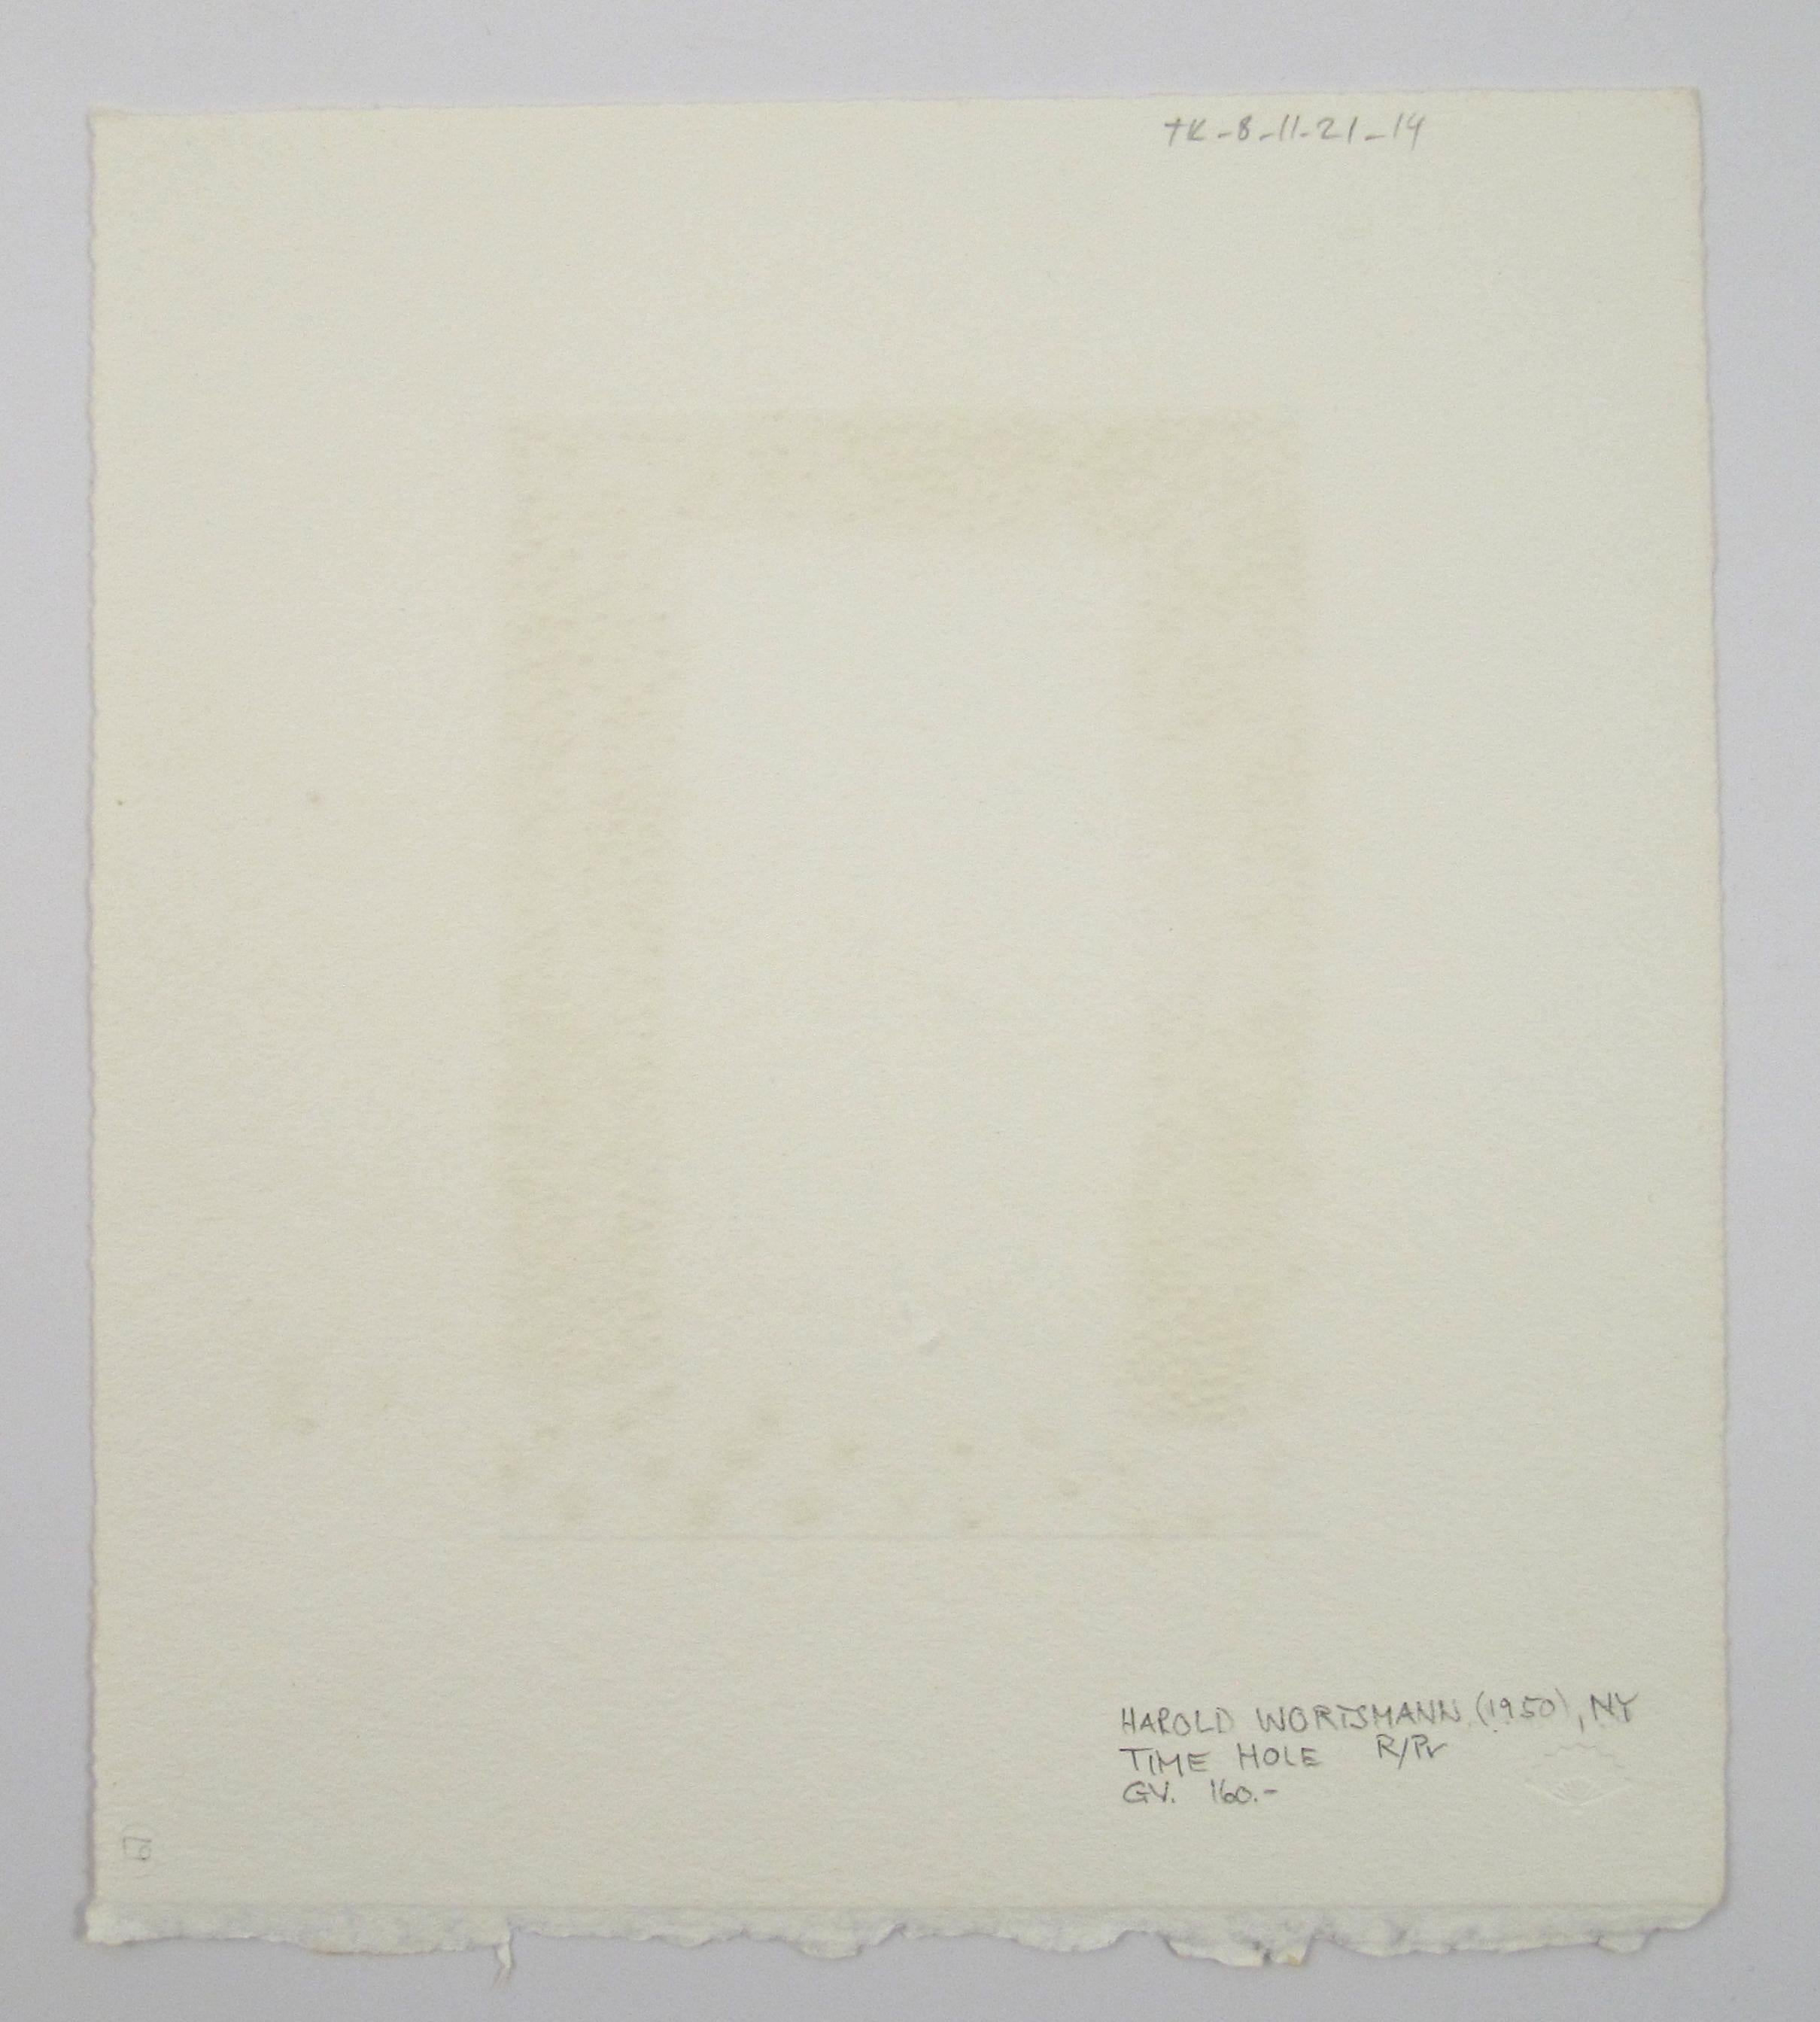 Harold Wortsmann (USA,  1950) - Limited Colored Engraving 16/20 - Time Hole For Sale 3